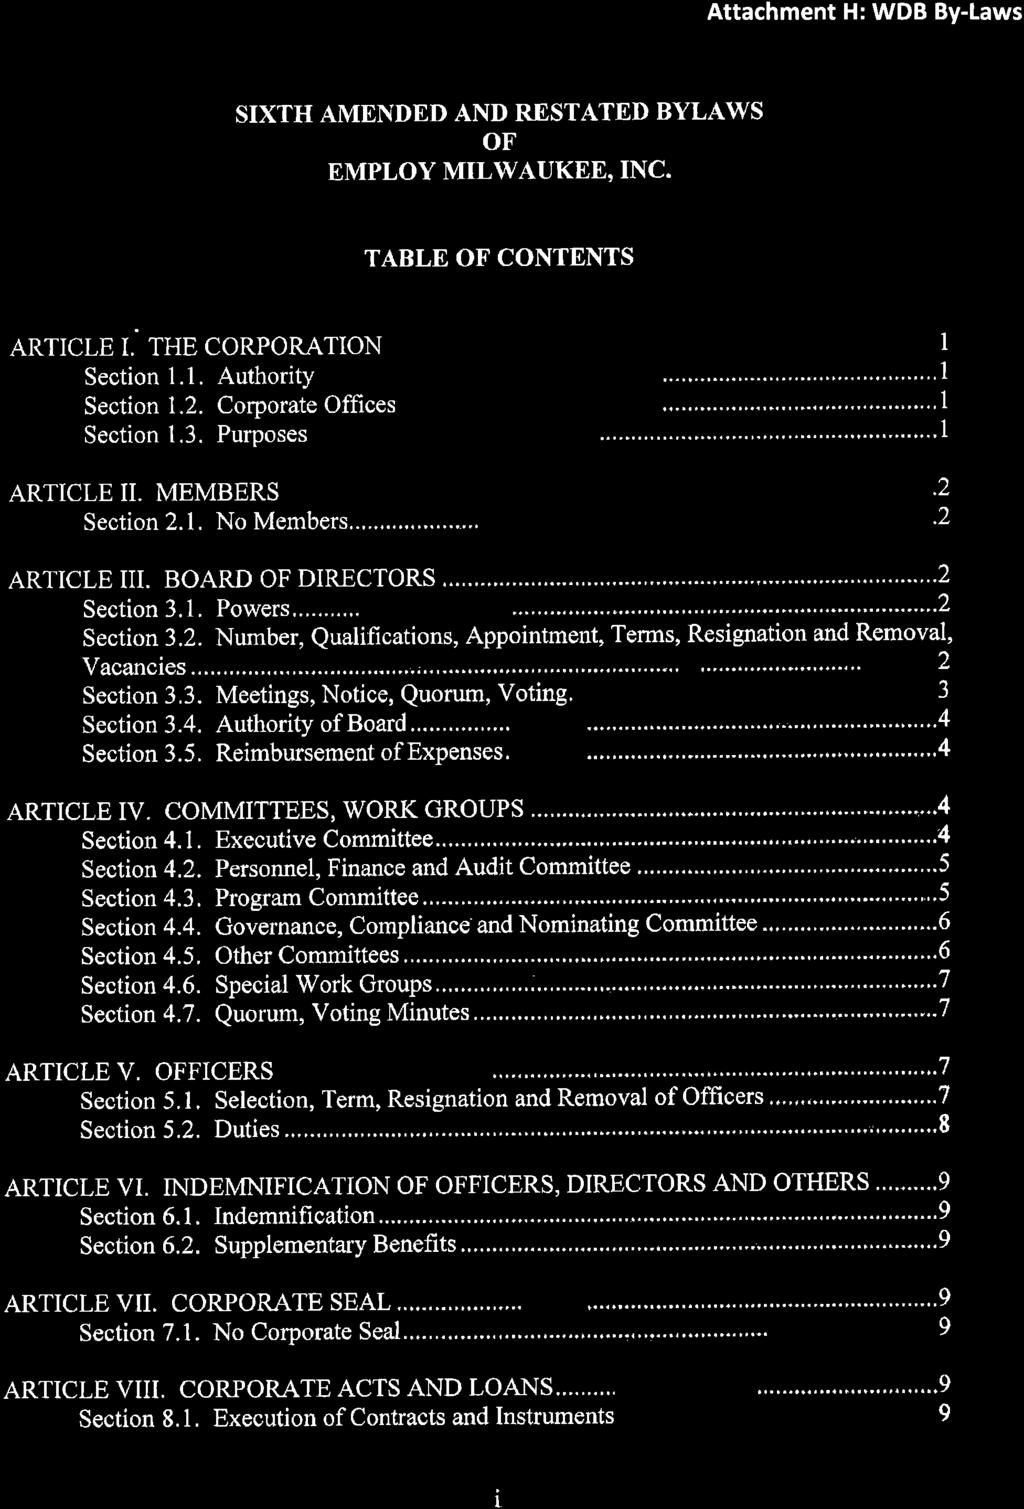 Attachment H: WDB By-Laws SIXTH AMENDED AND RESTATED BYLAWS OF EMPLOY MTLWAUKEE,INC. TABLE OF CONTENTS ARTICLE I, THE CORPORATION Section 1.1. Authority Section 1.2. Corporate Offices Section 1.3.